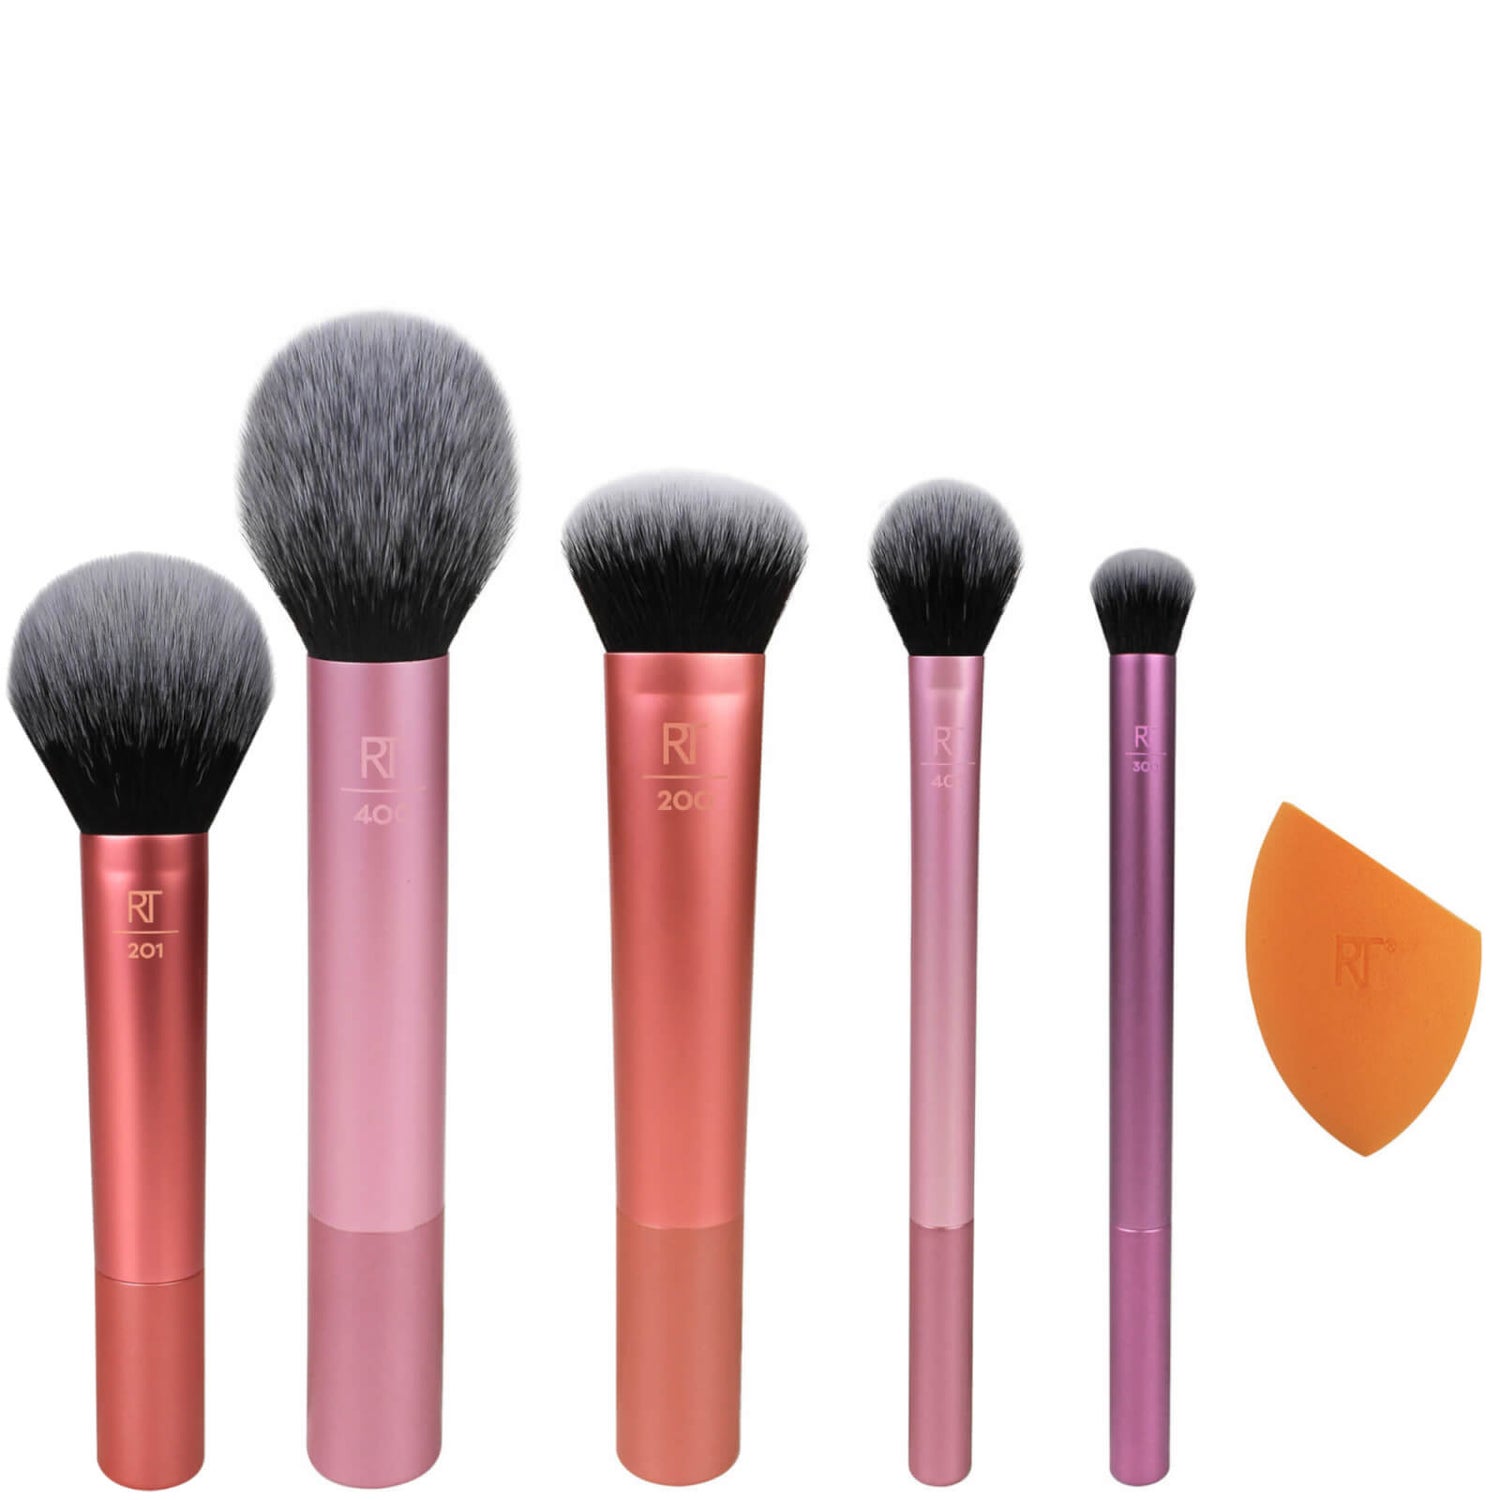 Buy Real Techniques 201 Powder Brush · USA